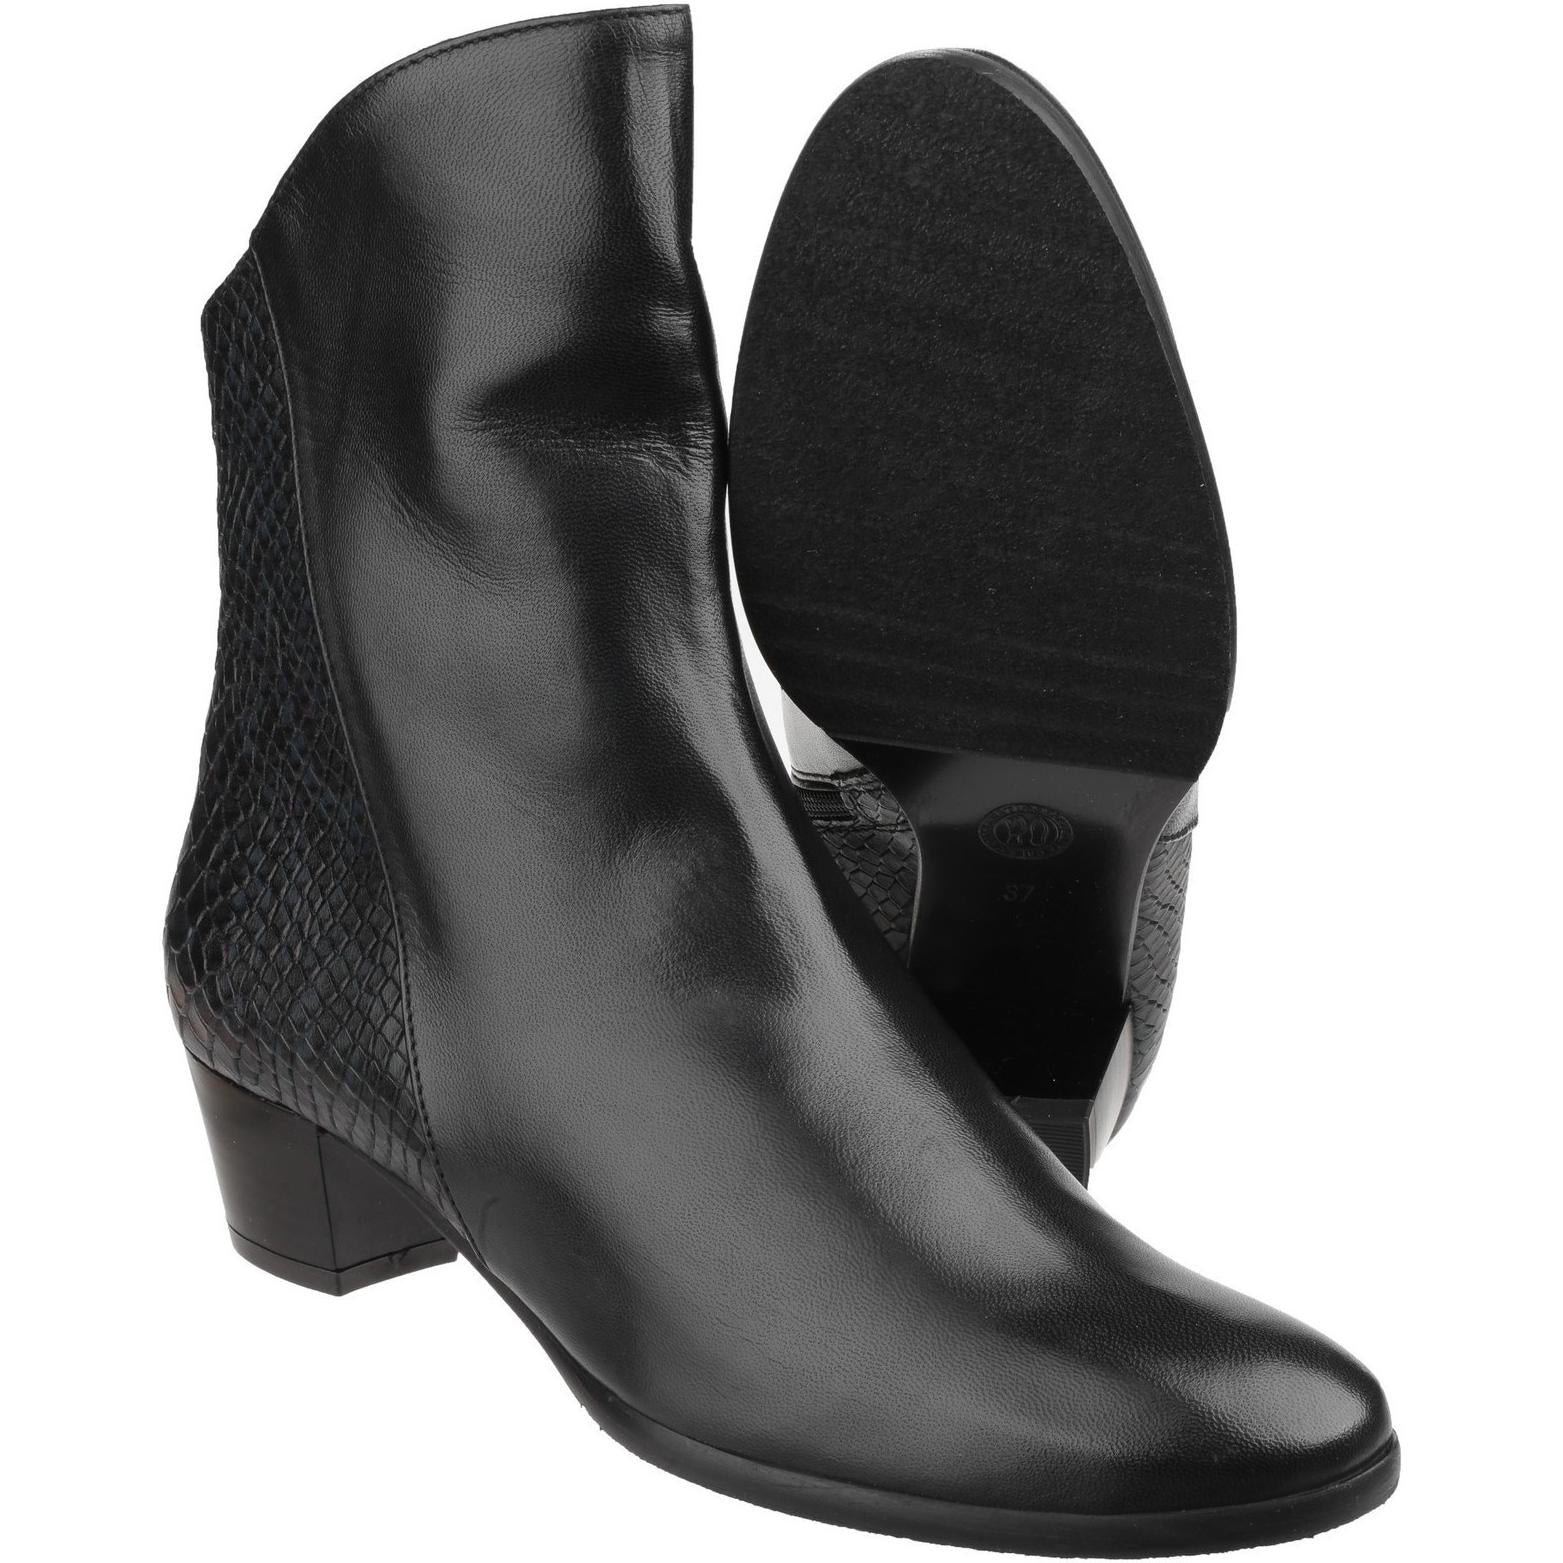 Riva Armadillo Pitone Leather Zip up Ankle Boot